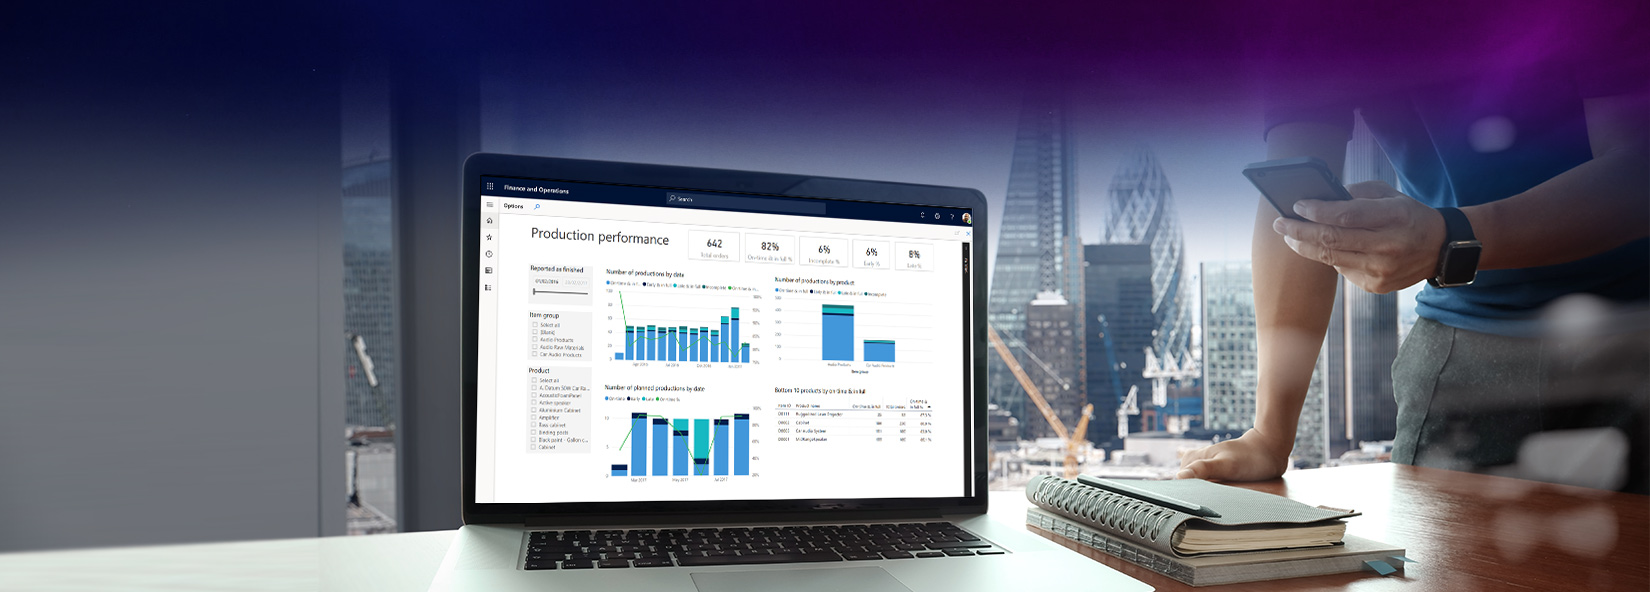 Microsoft Dynamics 365 for business growth